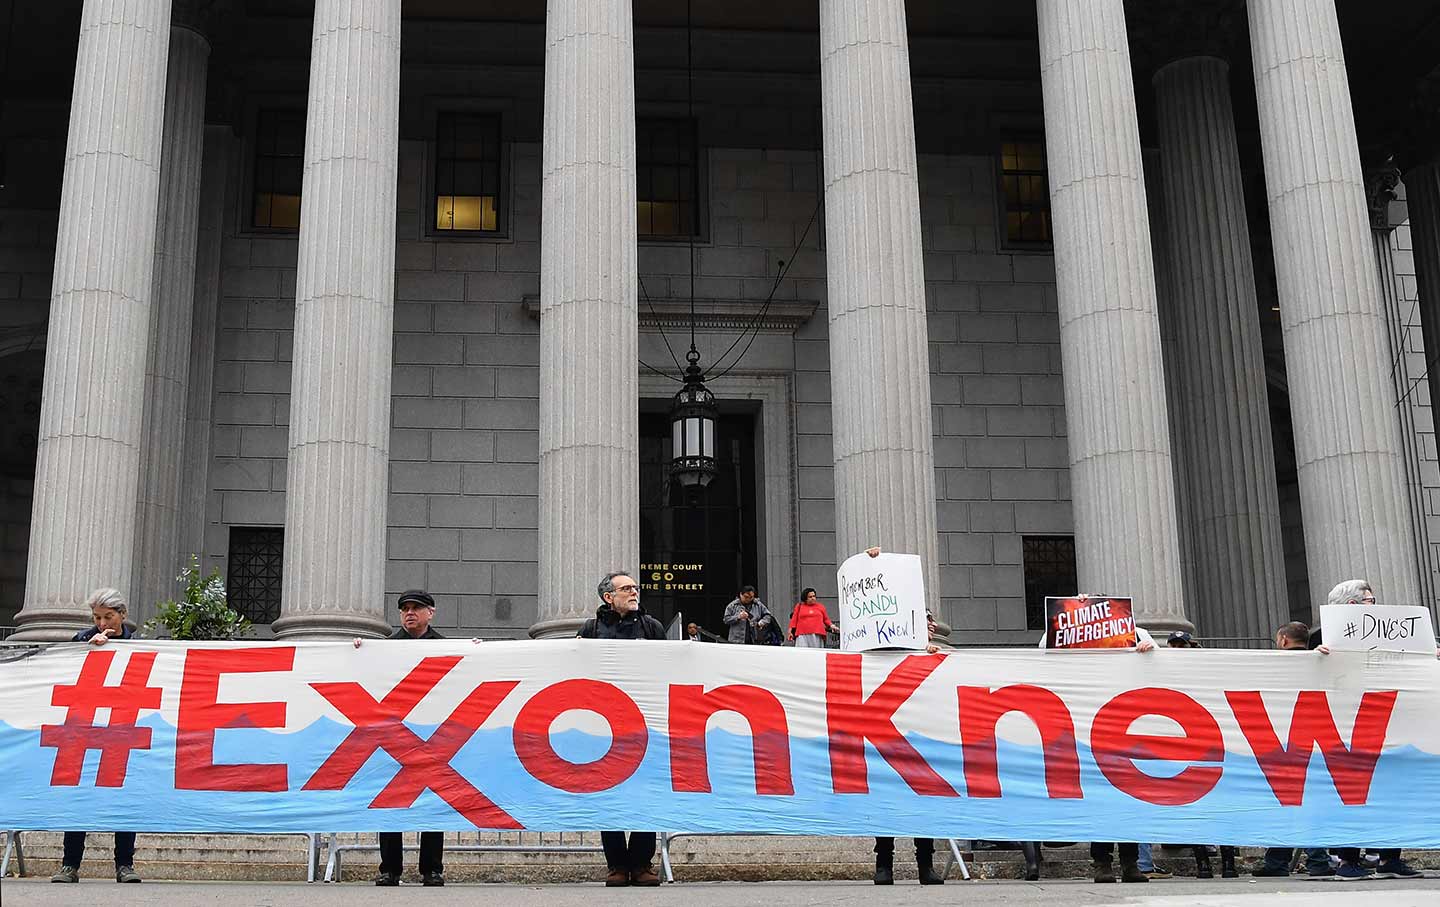 Climate activists protest on the first day of the Exxon Mobil trial outside the New York State Supreme Court building on October 22, 2019.